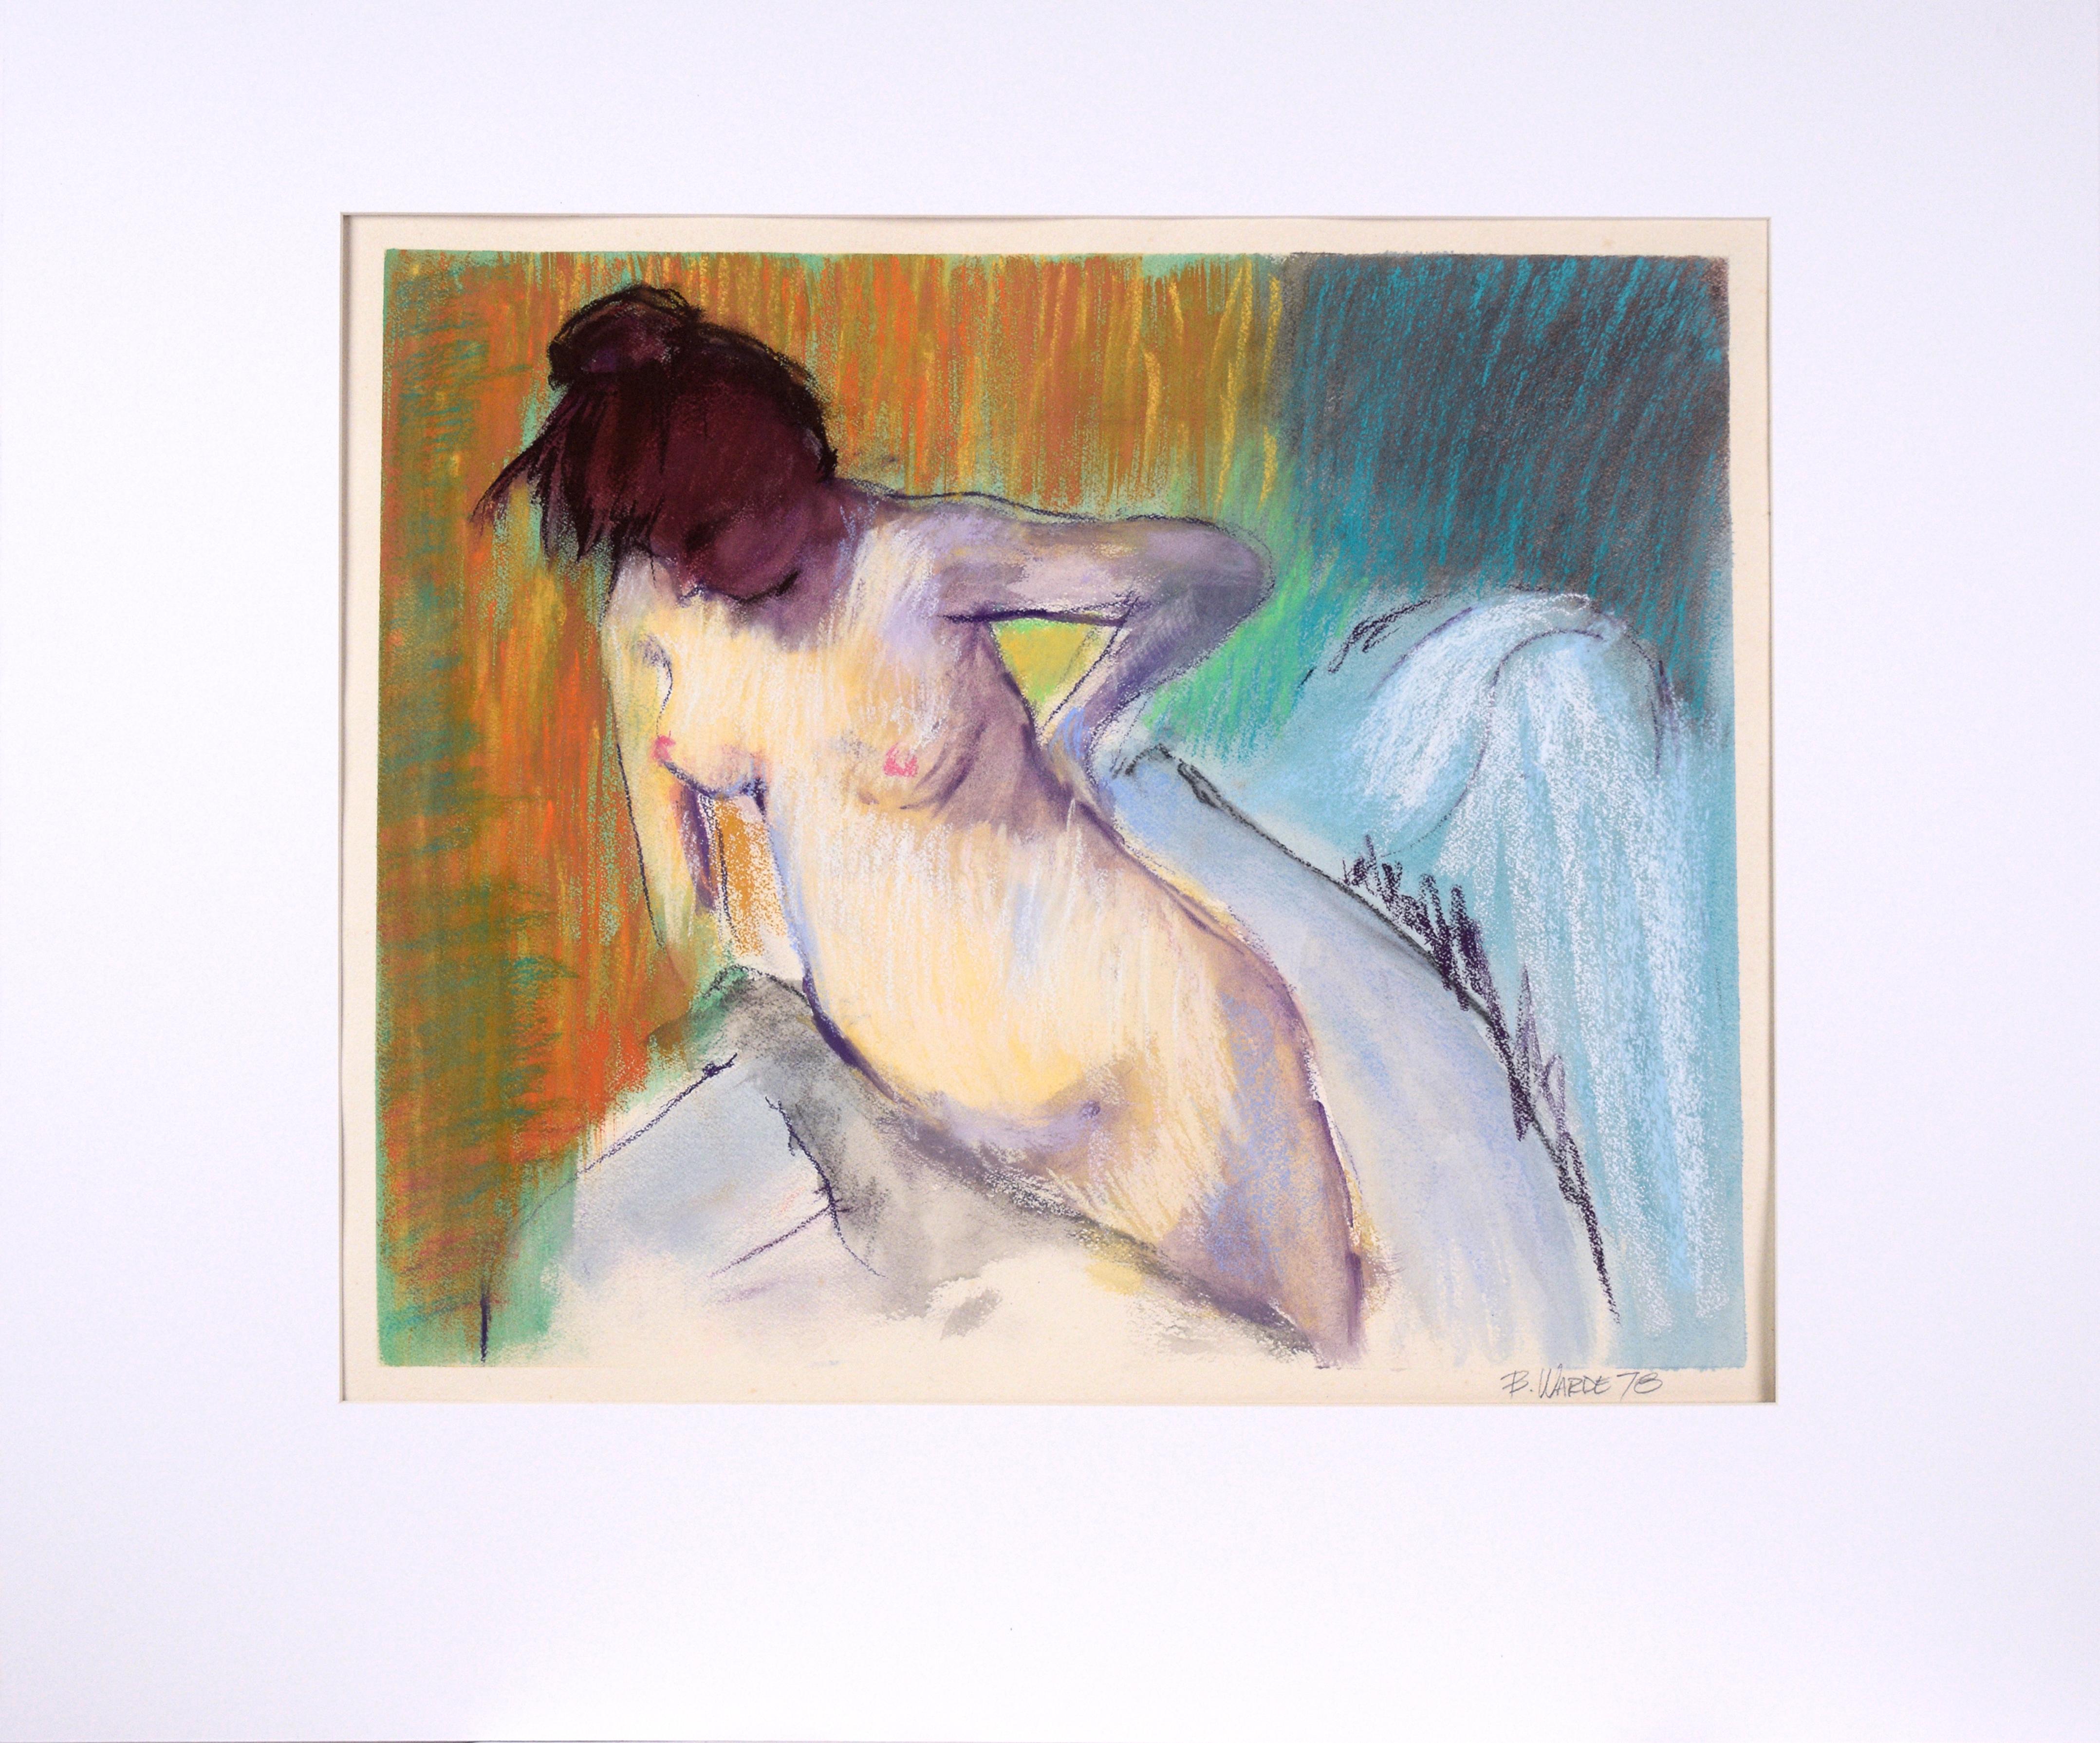 Unknown Figurative Art - Standing Female Figurative Nude in Watercolor and Pastel on Paper by B. Warde